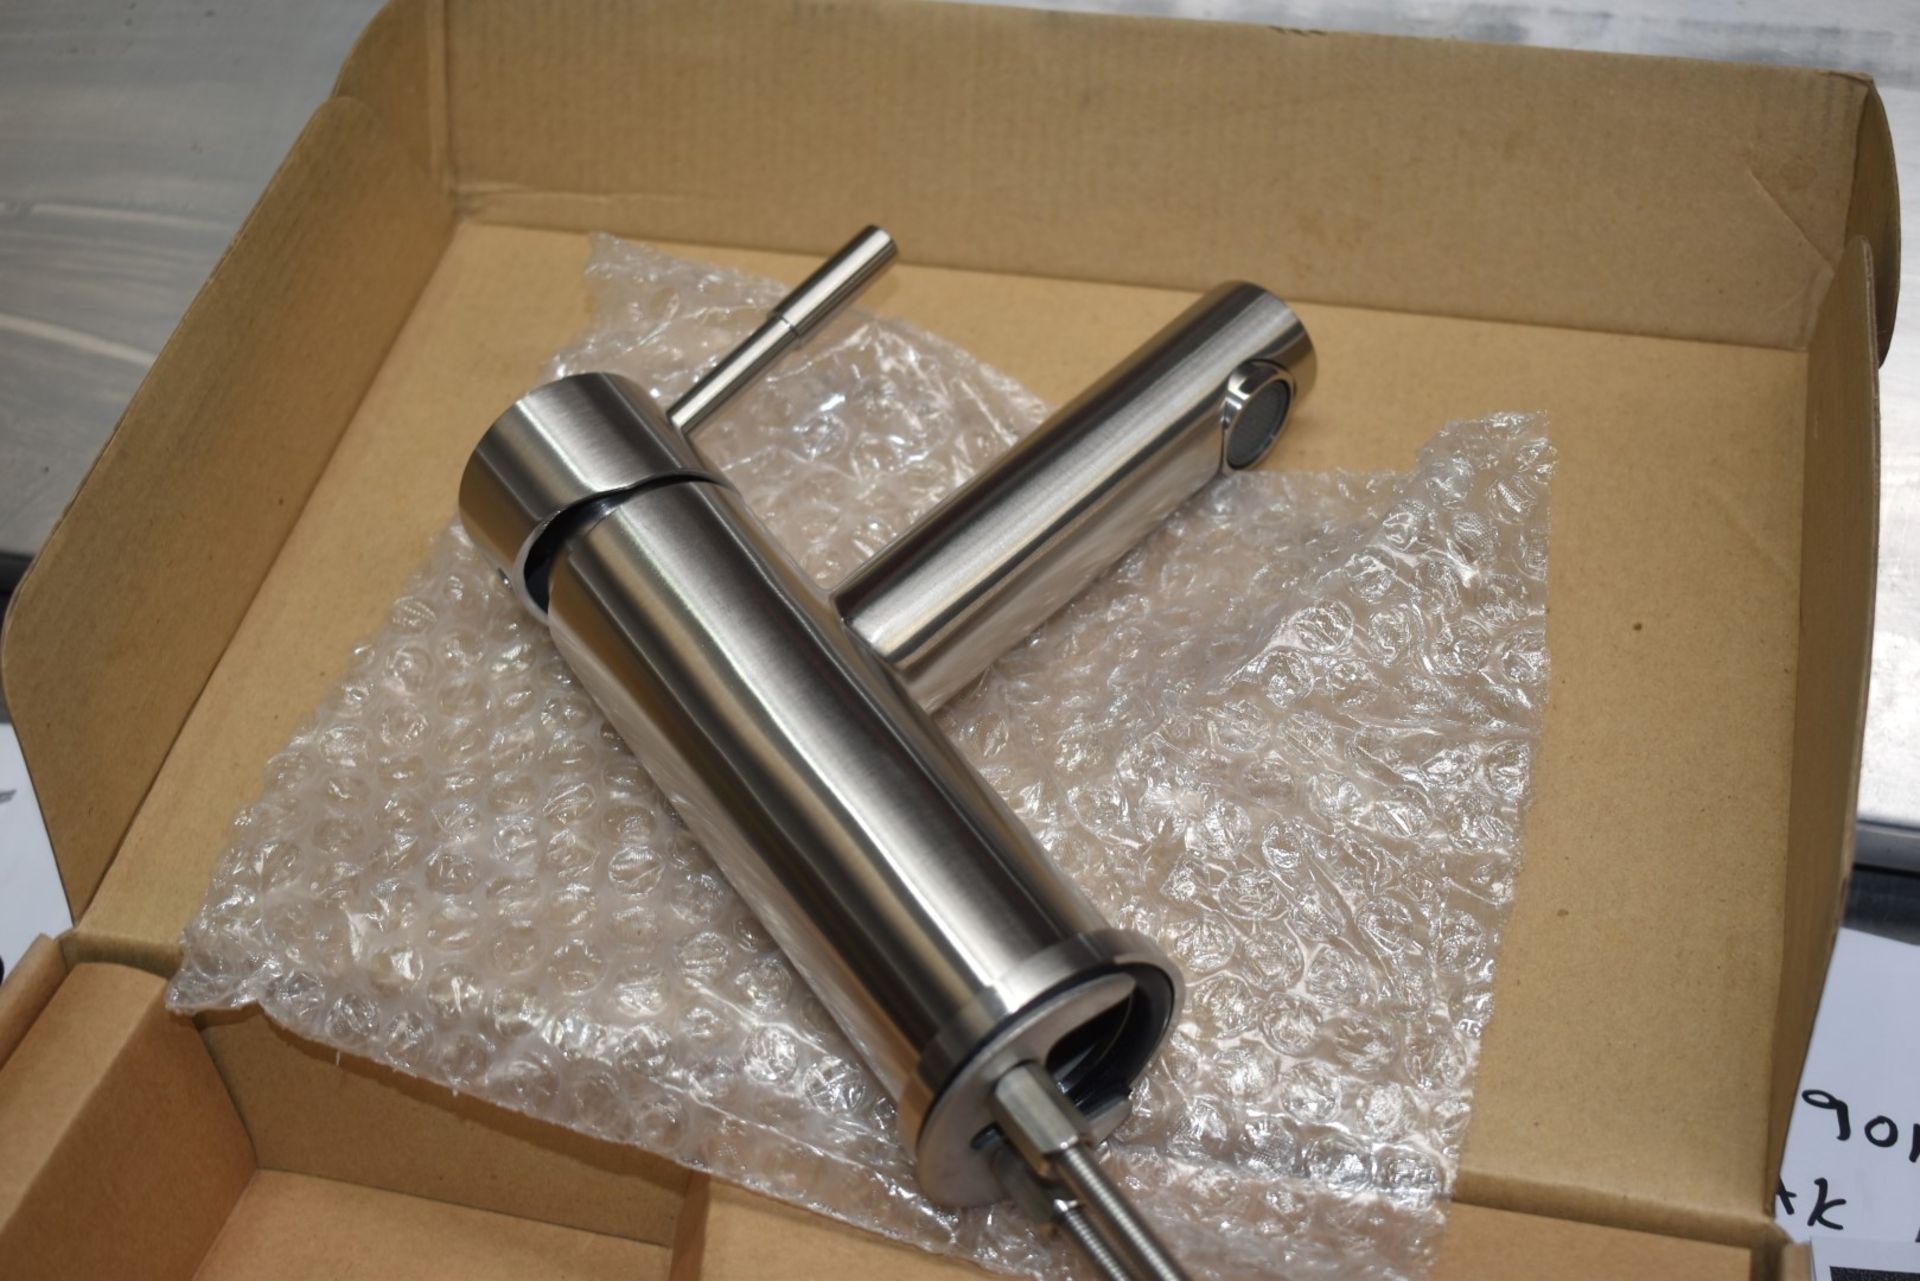 1 x Stonearth 'Hali' Stainless Steel Basin Mixer Tap - Brand New & Boxed - RRP £245 - Ref: TP801 WH2 - Image 3 of 7